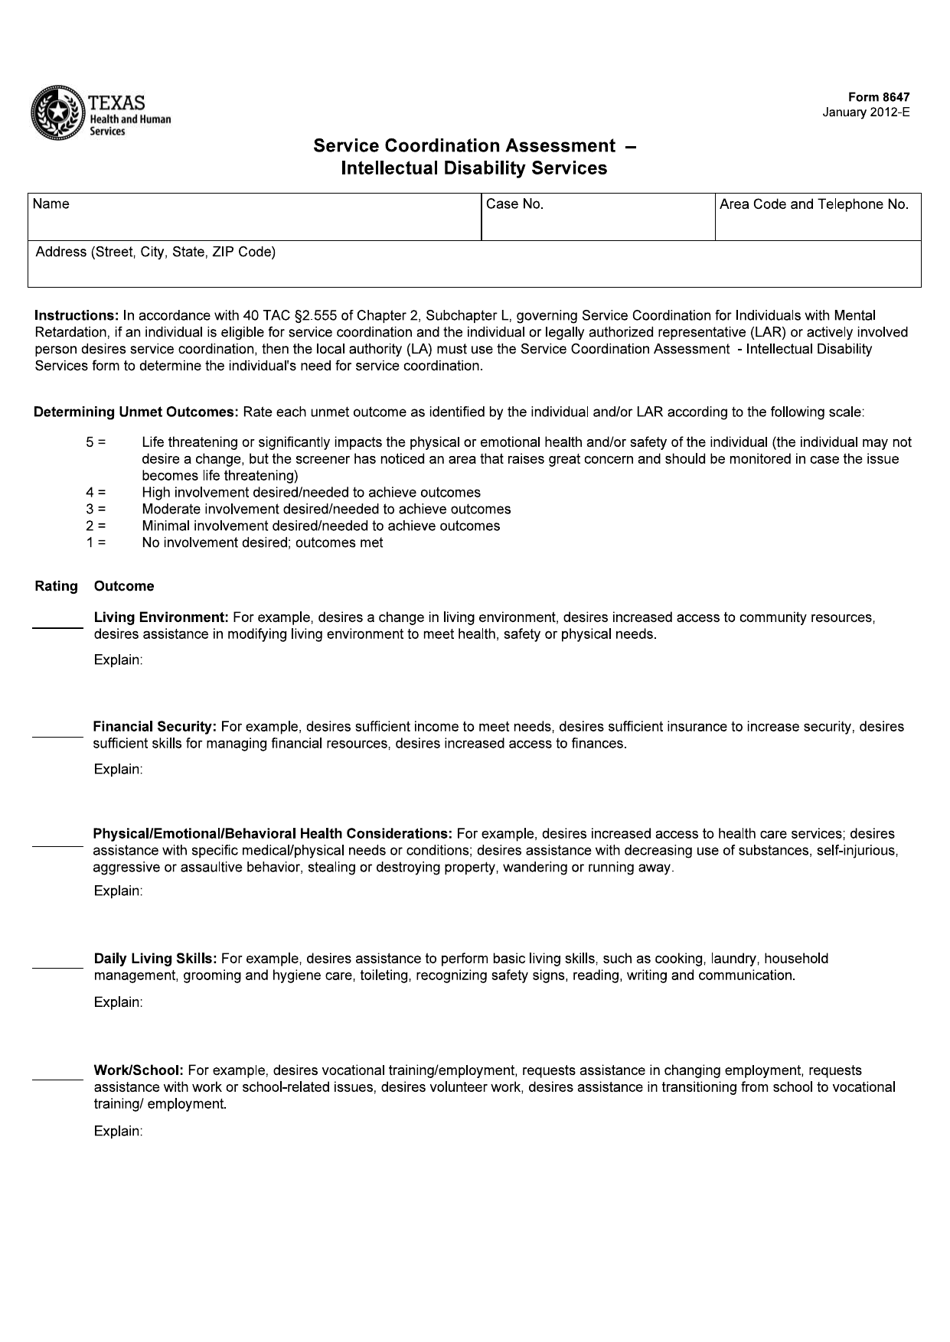 Form 8647 Service Coordination Assessment - Intellectual Disability Services - Texas, Page 1